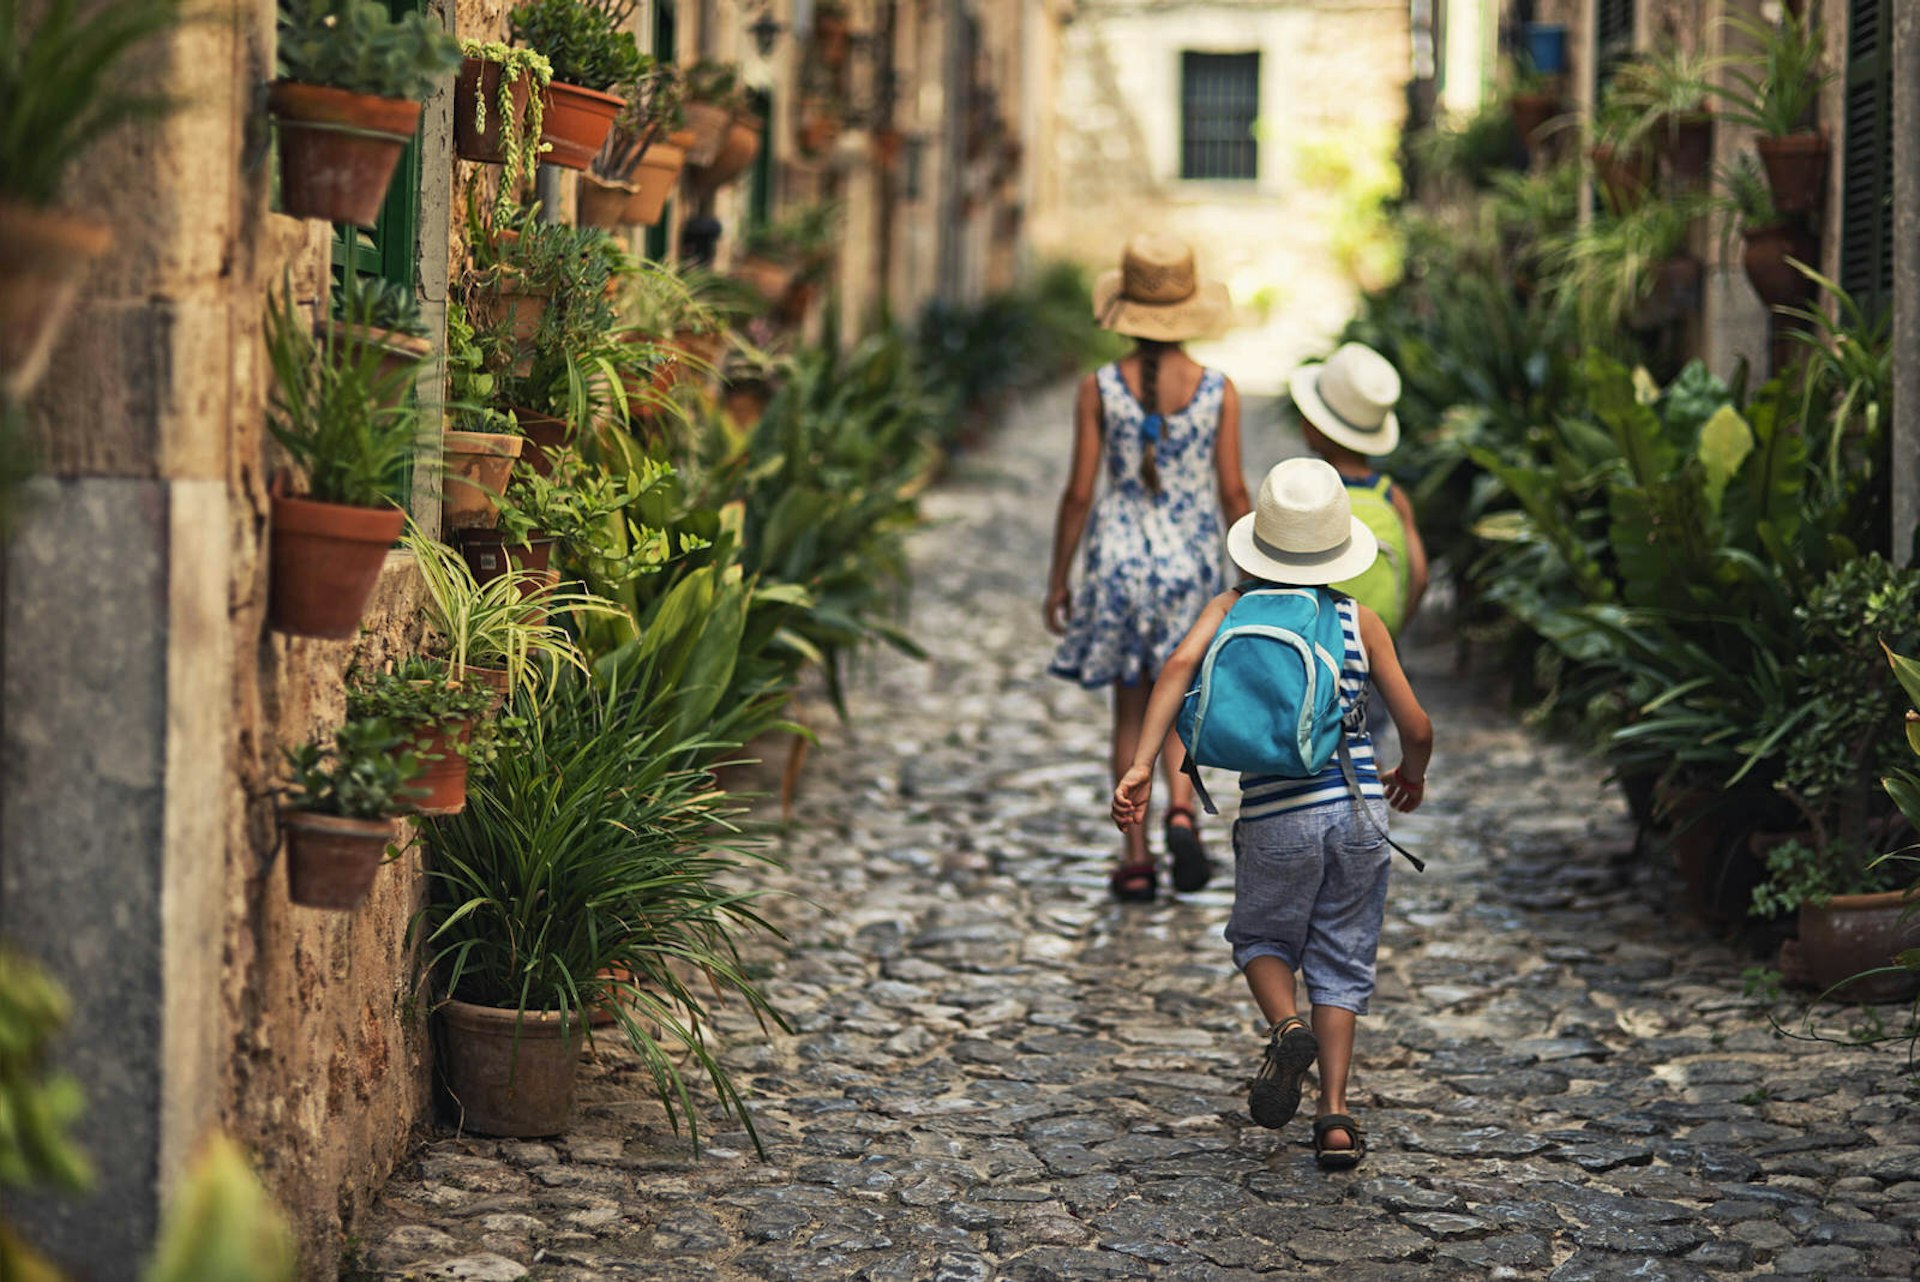 Three kids walking away from the camera in a cobble-stone alley lined with potted plants; the kids are all wearing sunhats and two have backpacks